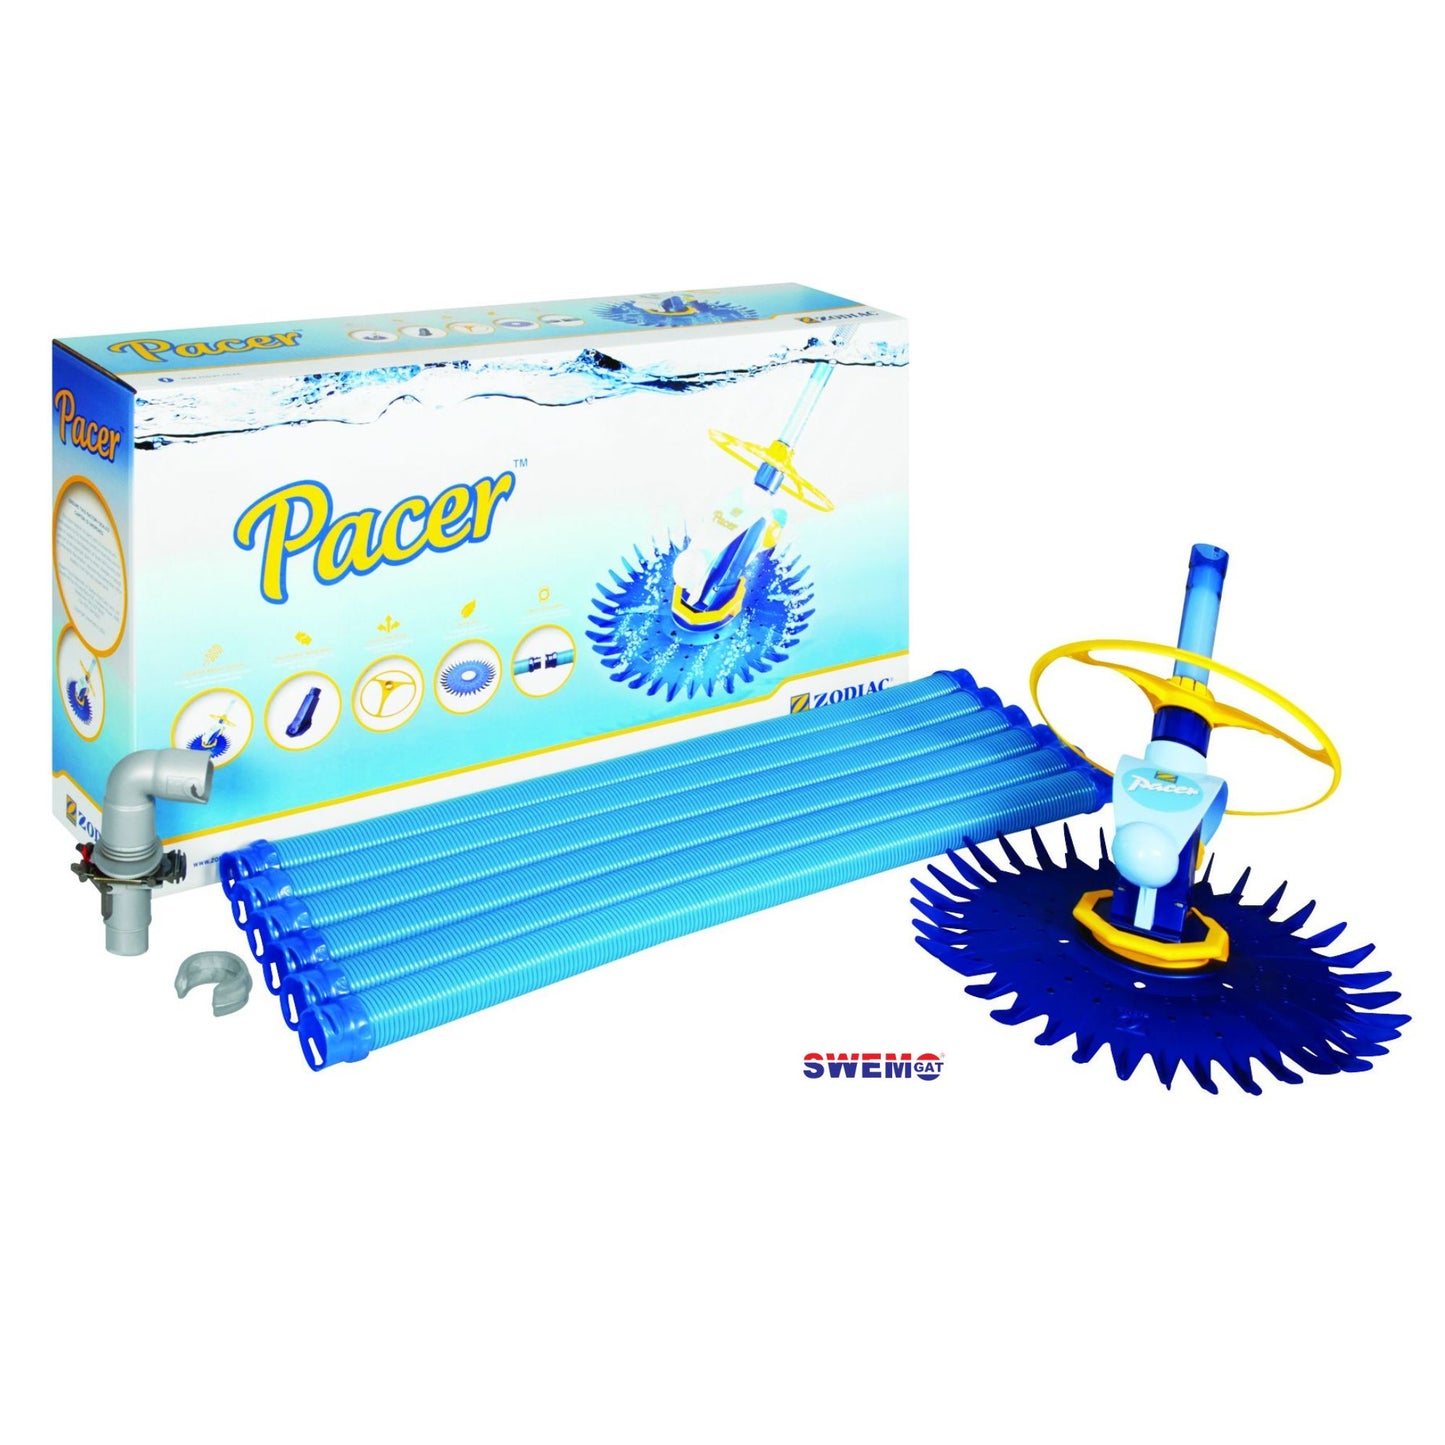 Zodiac - Pacer Pool Cleaner